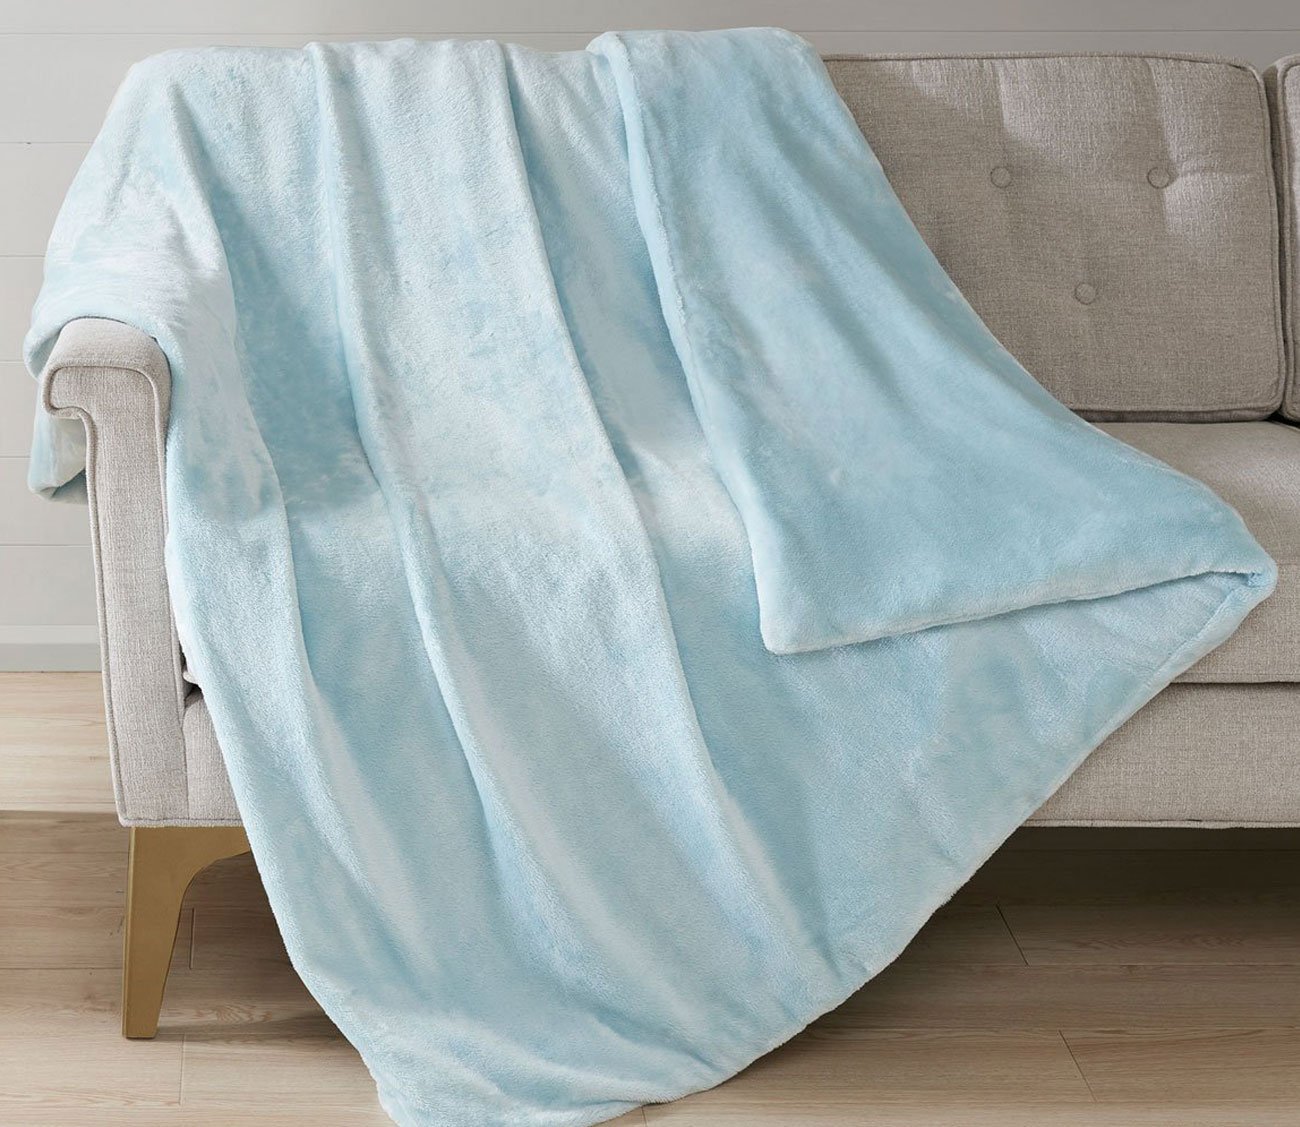 Plush Solid 18 Pound Weighted Blanket by Sleep Philosophy